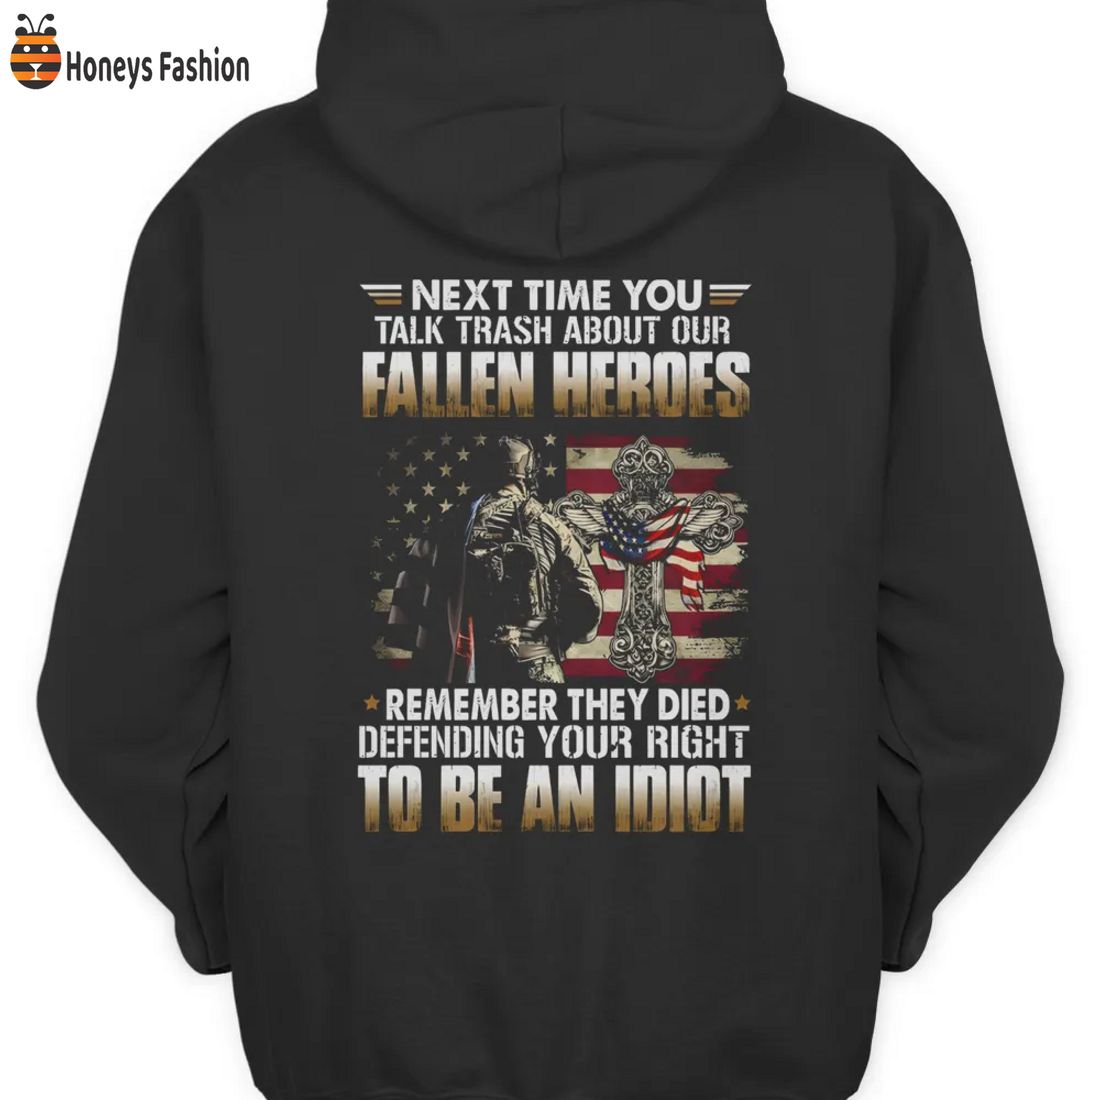 HOT Veterans Next Time You Talk Trash About Our Fallen Heroes Remember They Died Defending Your Right To Be An Indiot Shirt